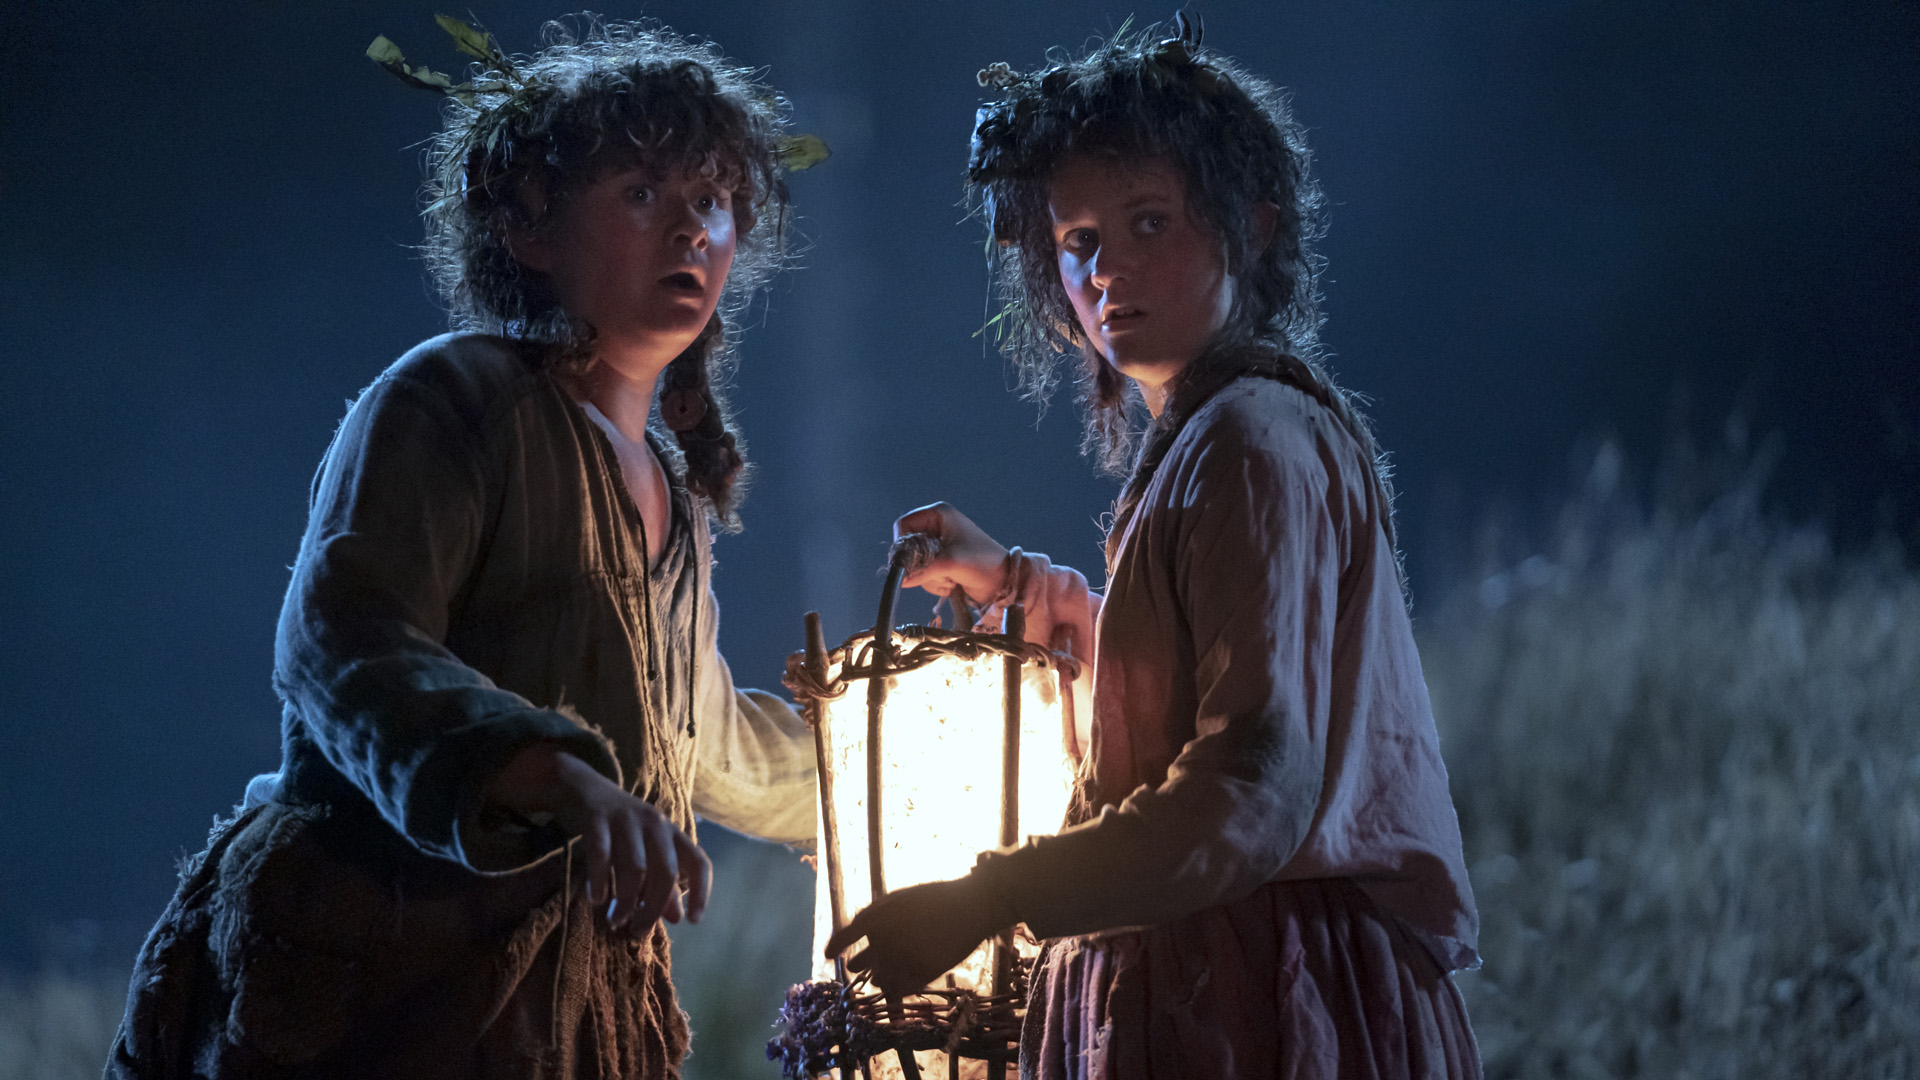 Nori Brandyfoot and Poppy Proudfellow look behind them with their faces lit by a lantern at night in The Rings of Power